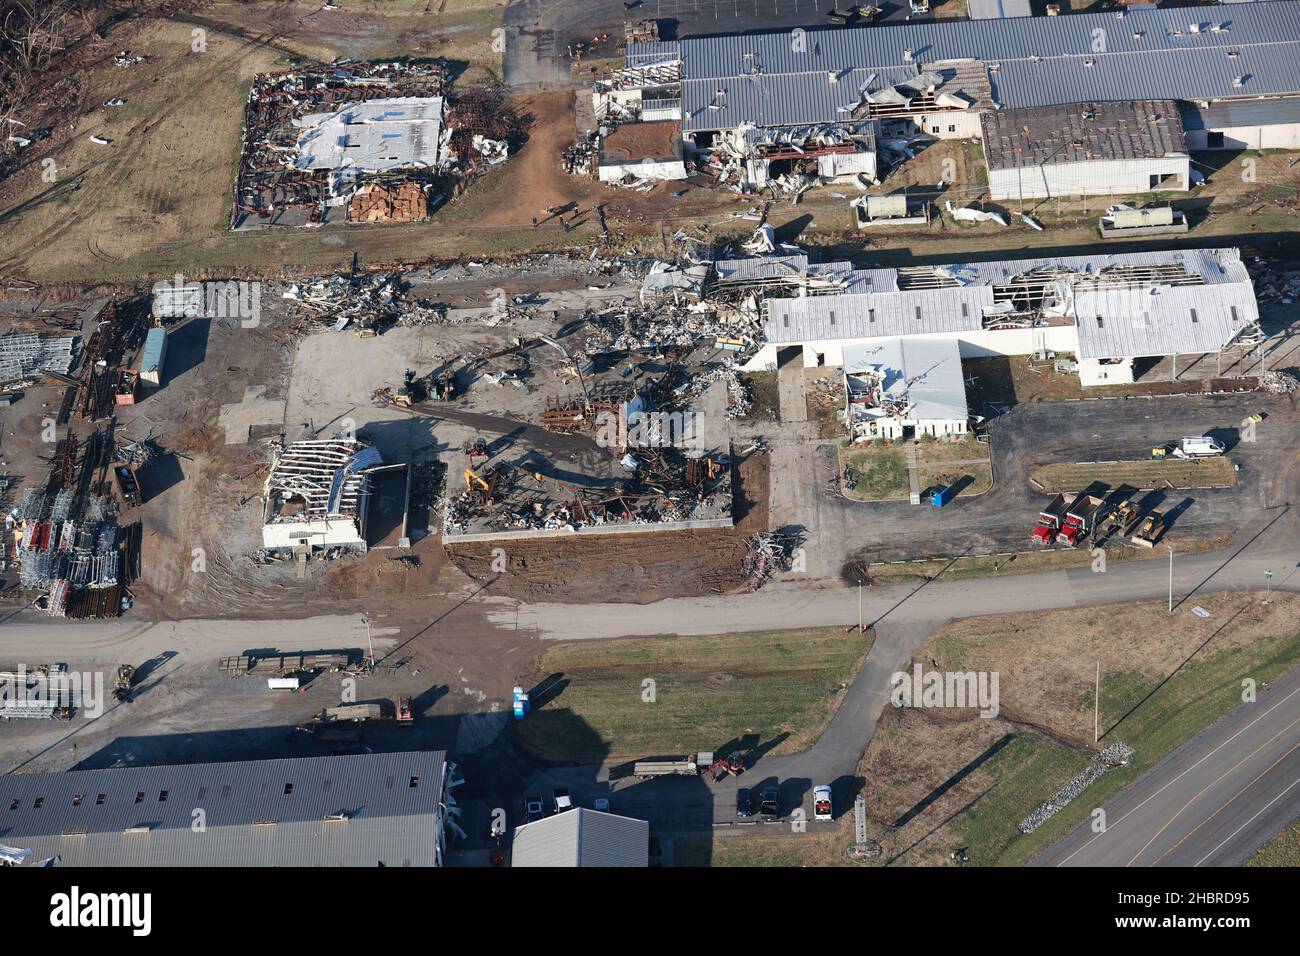 Mayfield, KY, USA. 20th Dec, 2021. Aerial view of the Mayfield Candle Factory in Mayfield, Kentucky, after rare December tornadoes ripped through Kentucky, resulting in the deaths of 78 people. Governor Beshar said, during a press conference, that there are no active search and rescue operations taking place in the state. December 20, 2021. Credit: Mpi34/Media Punch Credit: Media Punch Inc/Alamy Live News/Alamy Live News Stock Photo